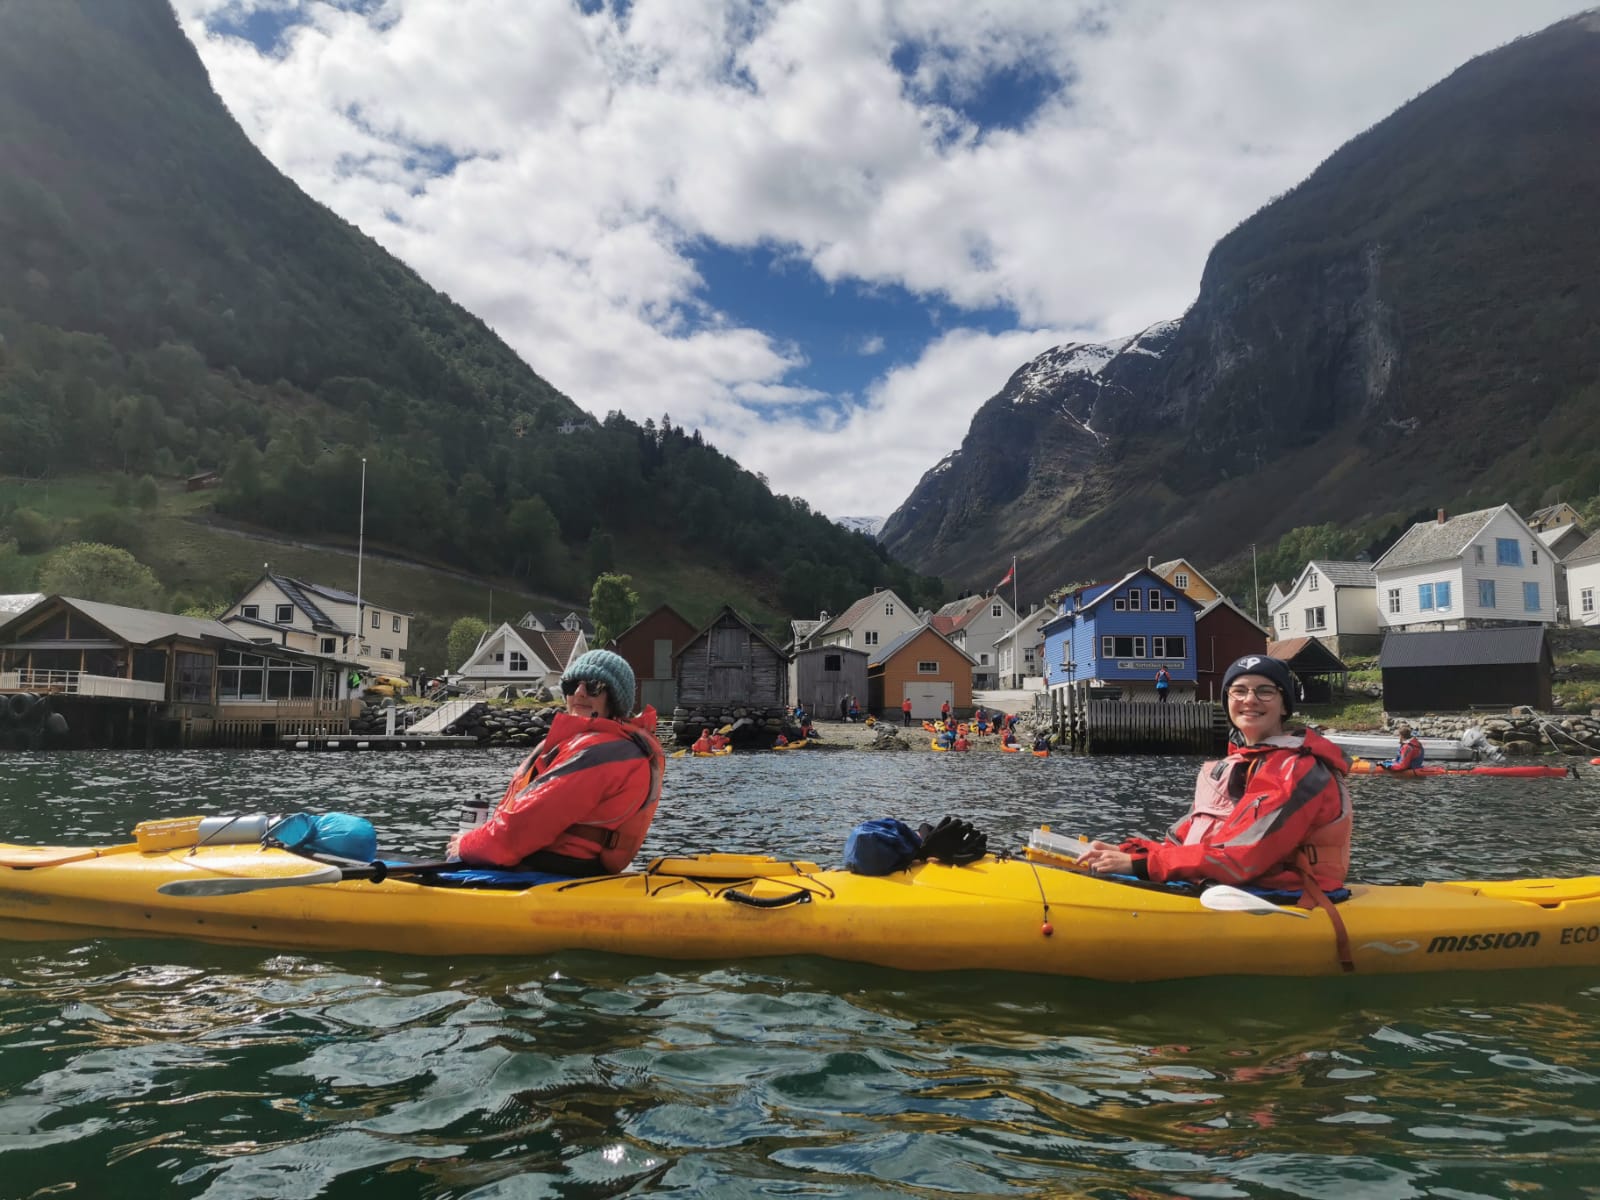 Two women kayakers in the Norwegian fjords.